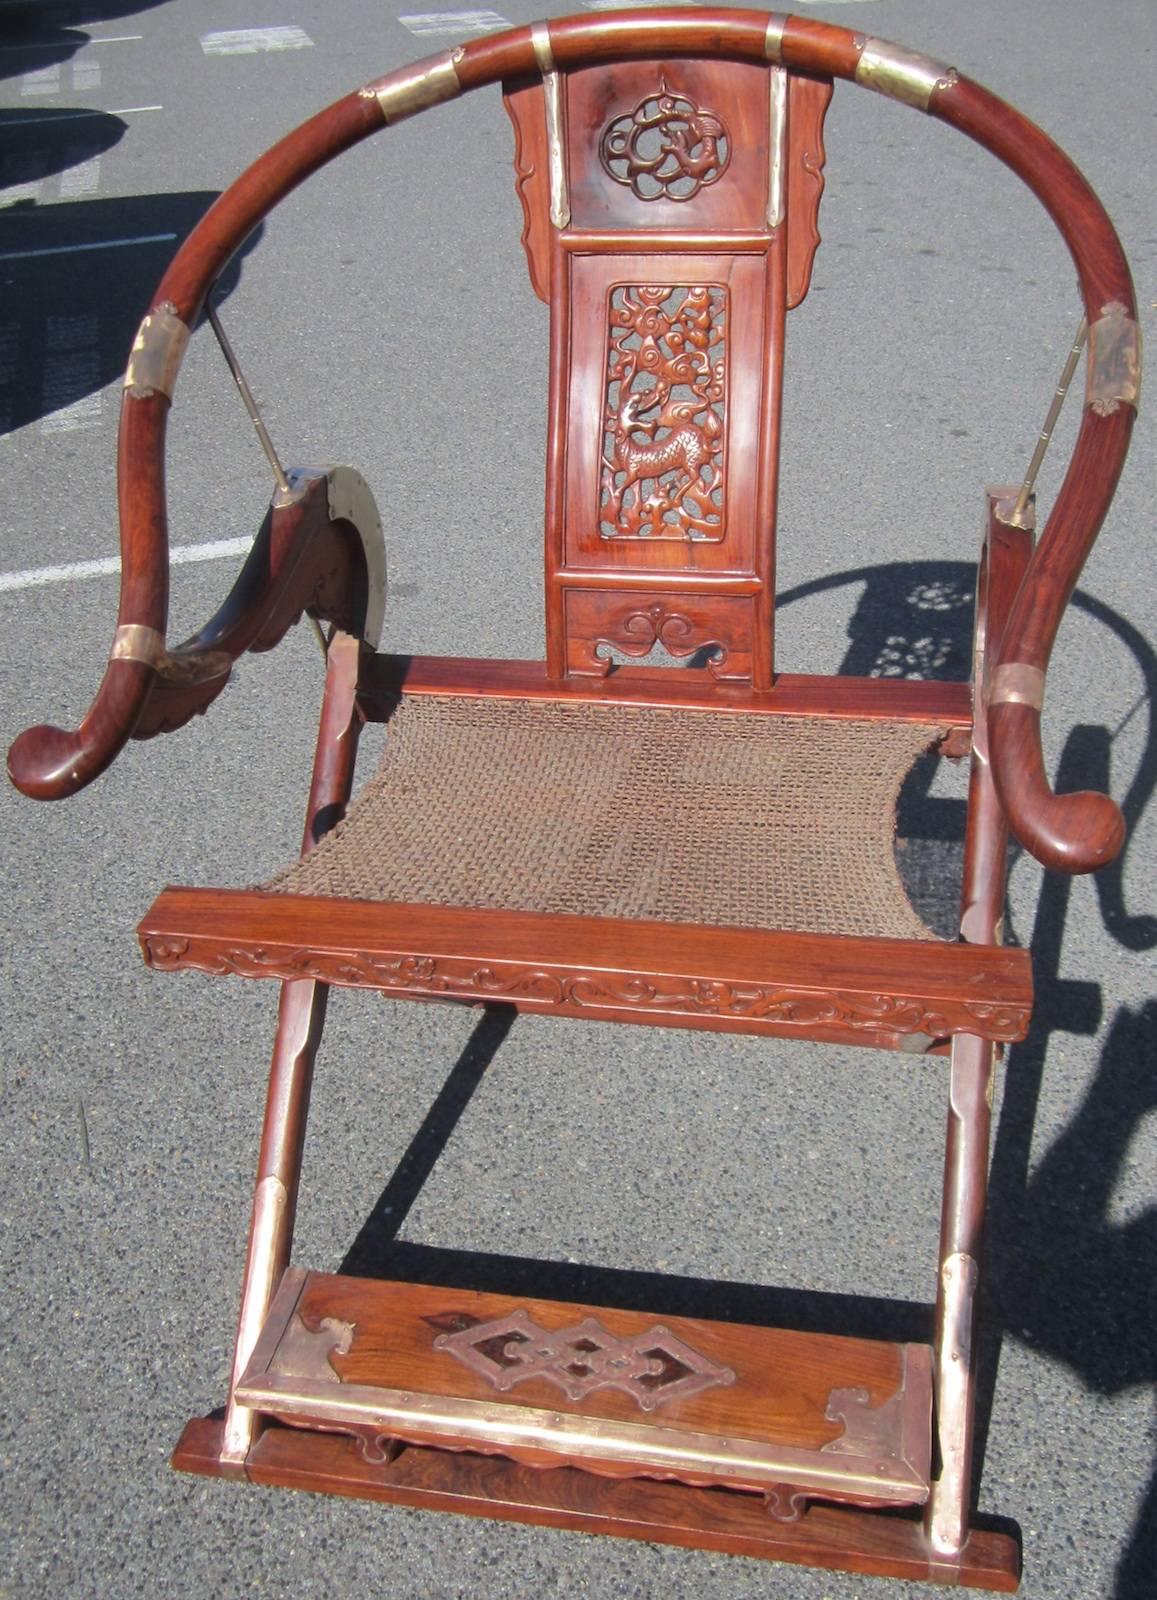 Chinese folding hunting chair,
tulip wood with brass and copper binding,
ex Macau casino,
Measures: 77 x 60 x 108cm high.